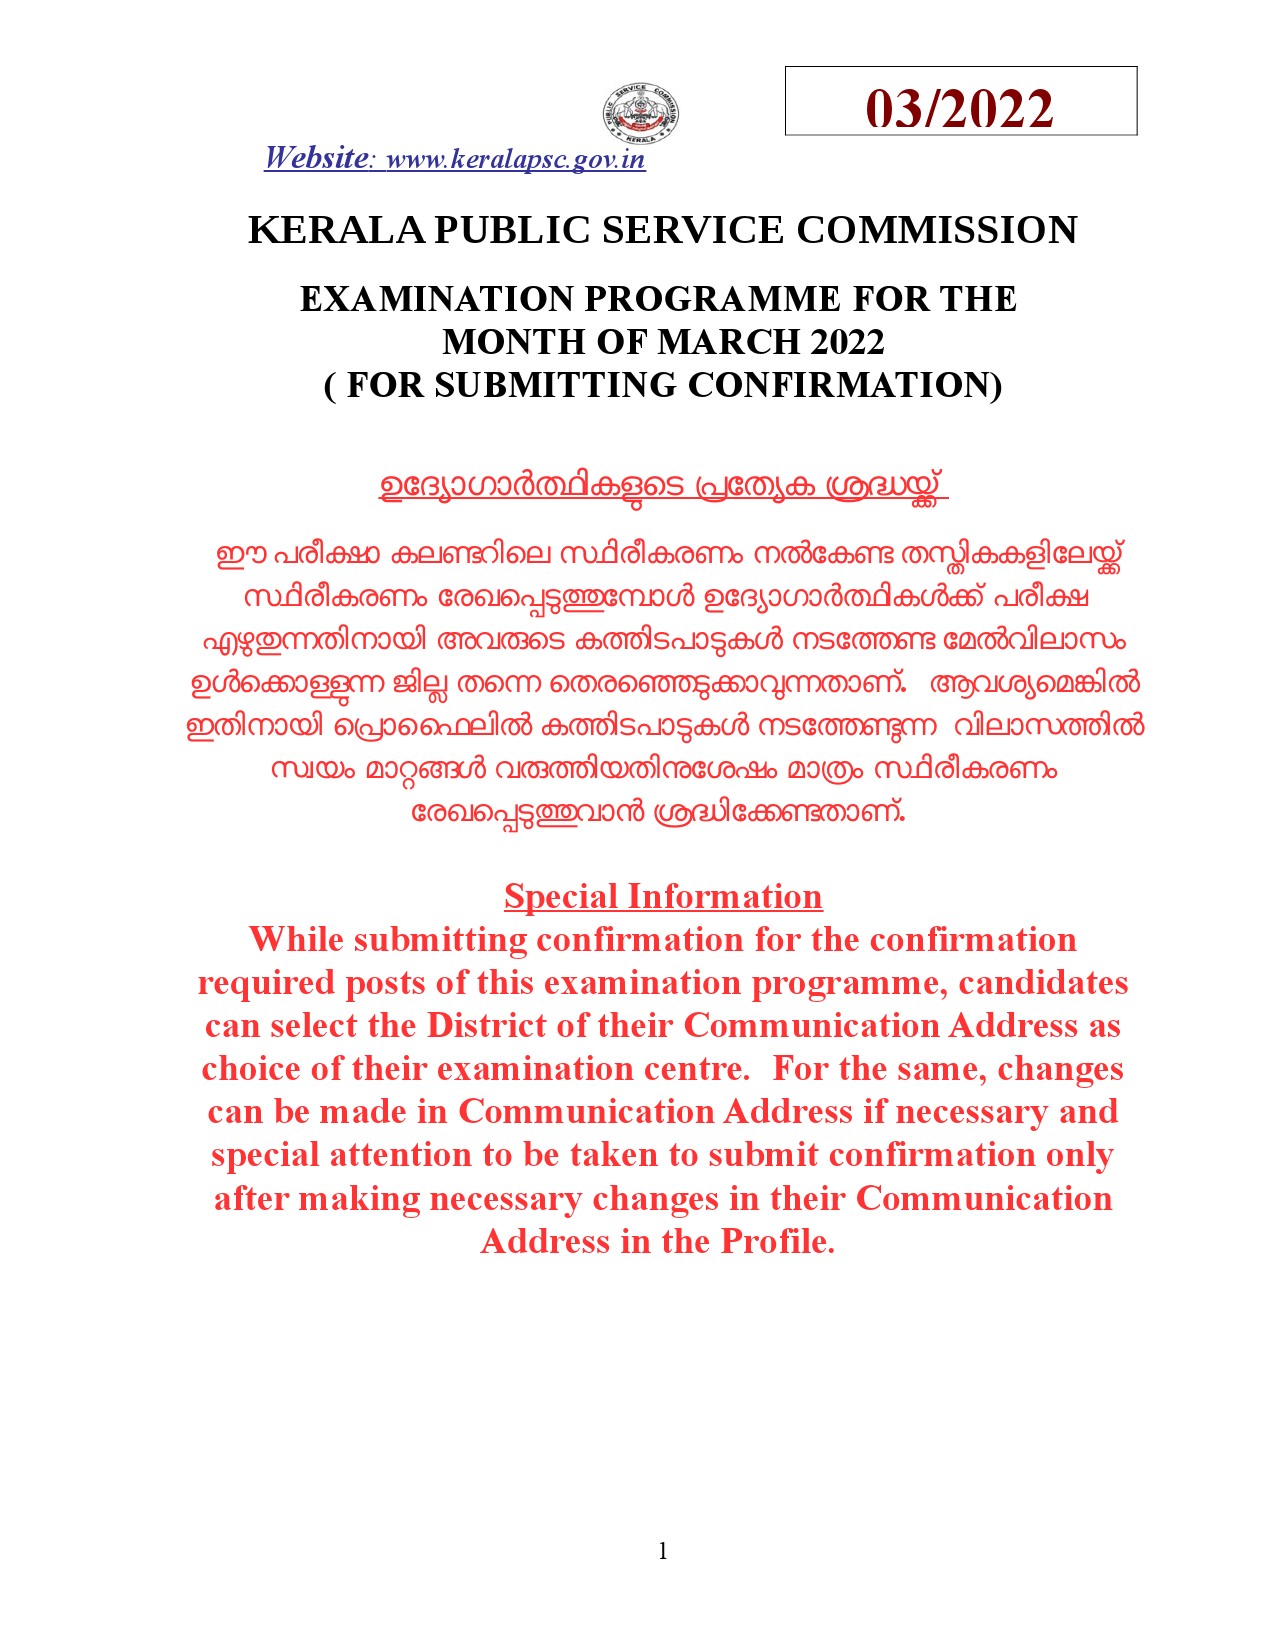 KPSC EXAMINATION PROGRAMME FOR THE MONTH OF MARCH 2022 - Notification Image 1